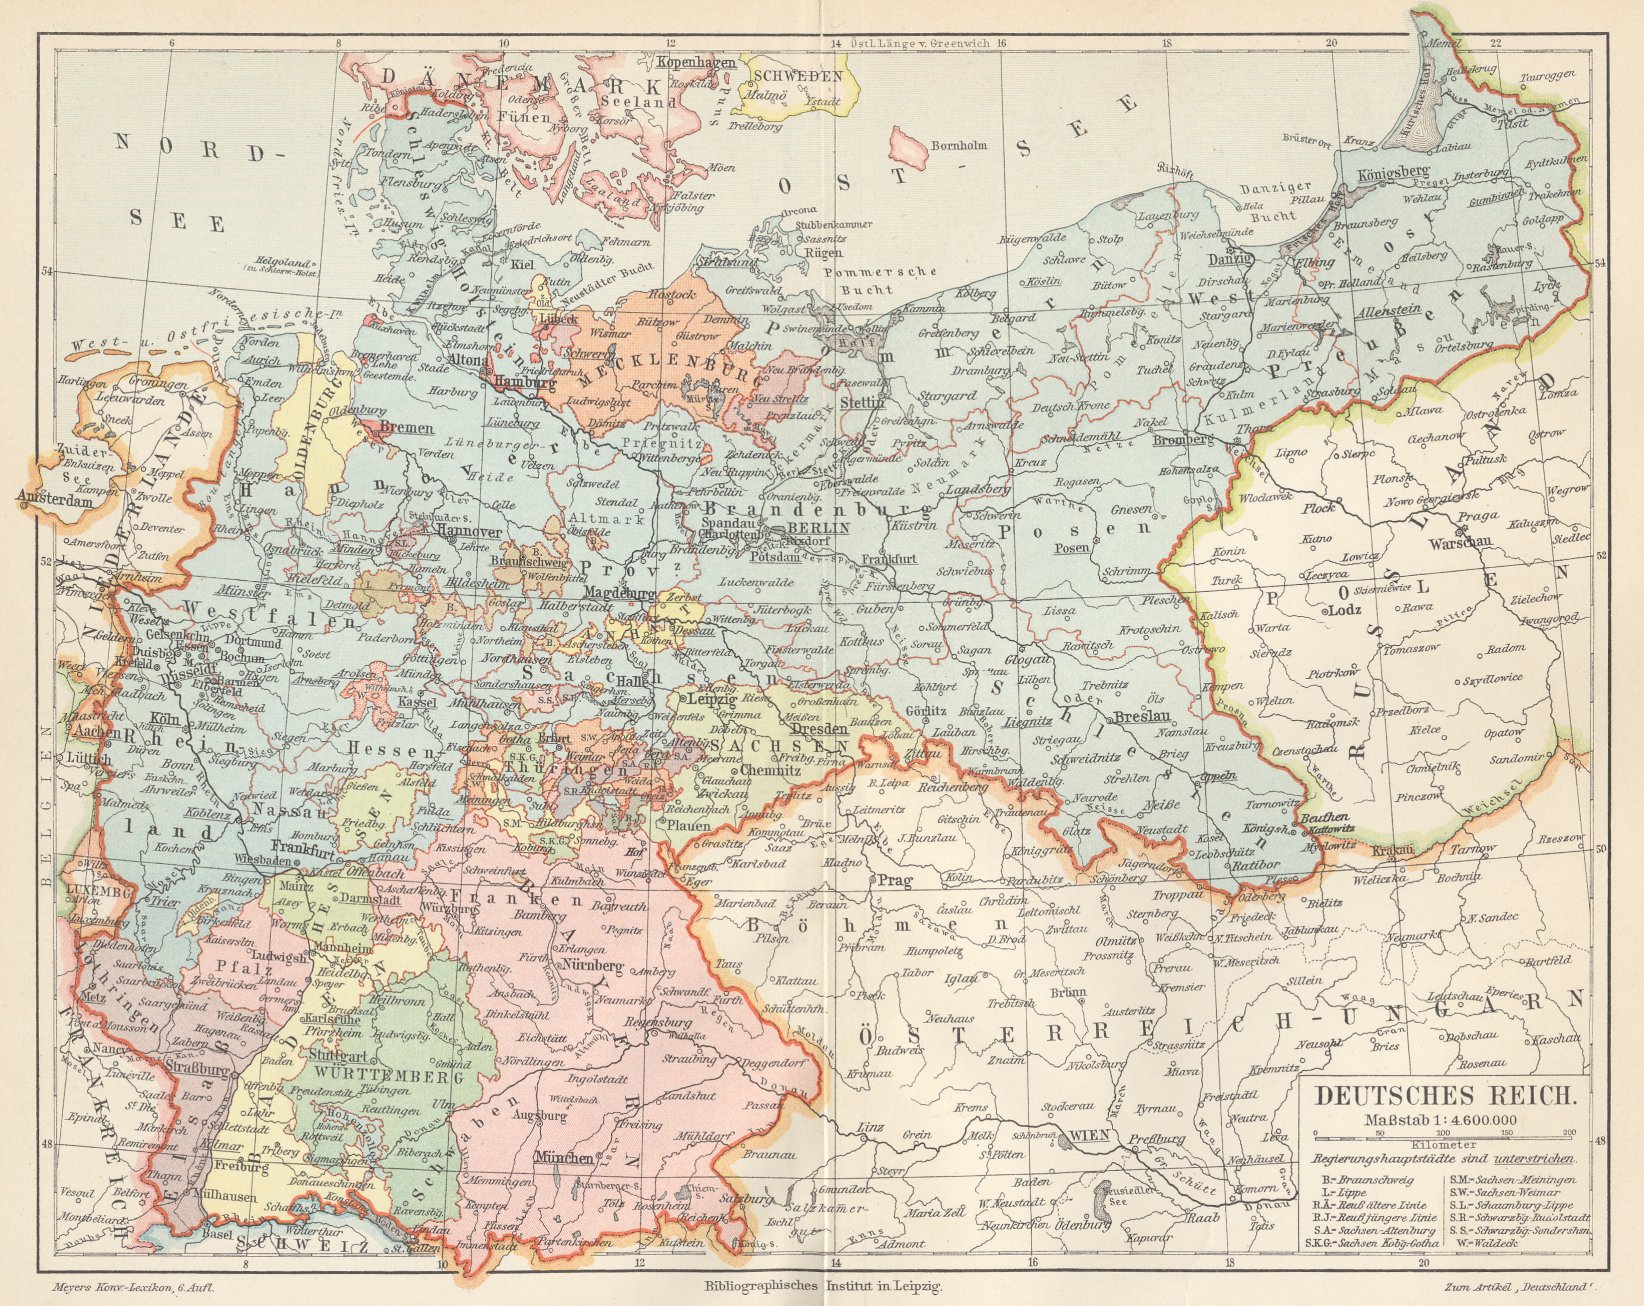 German Empire in 1900 - Full size